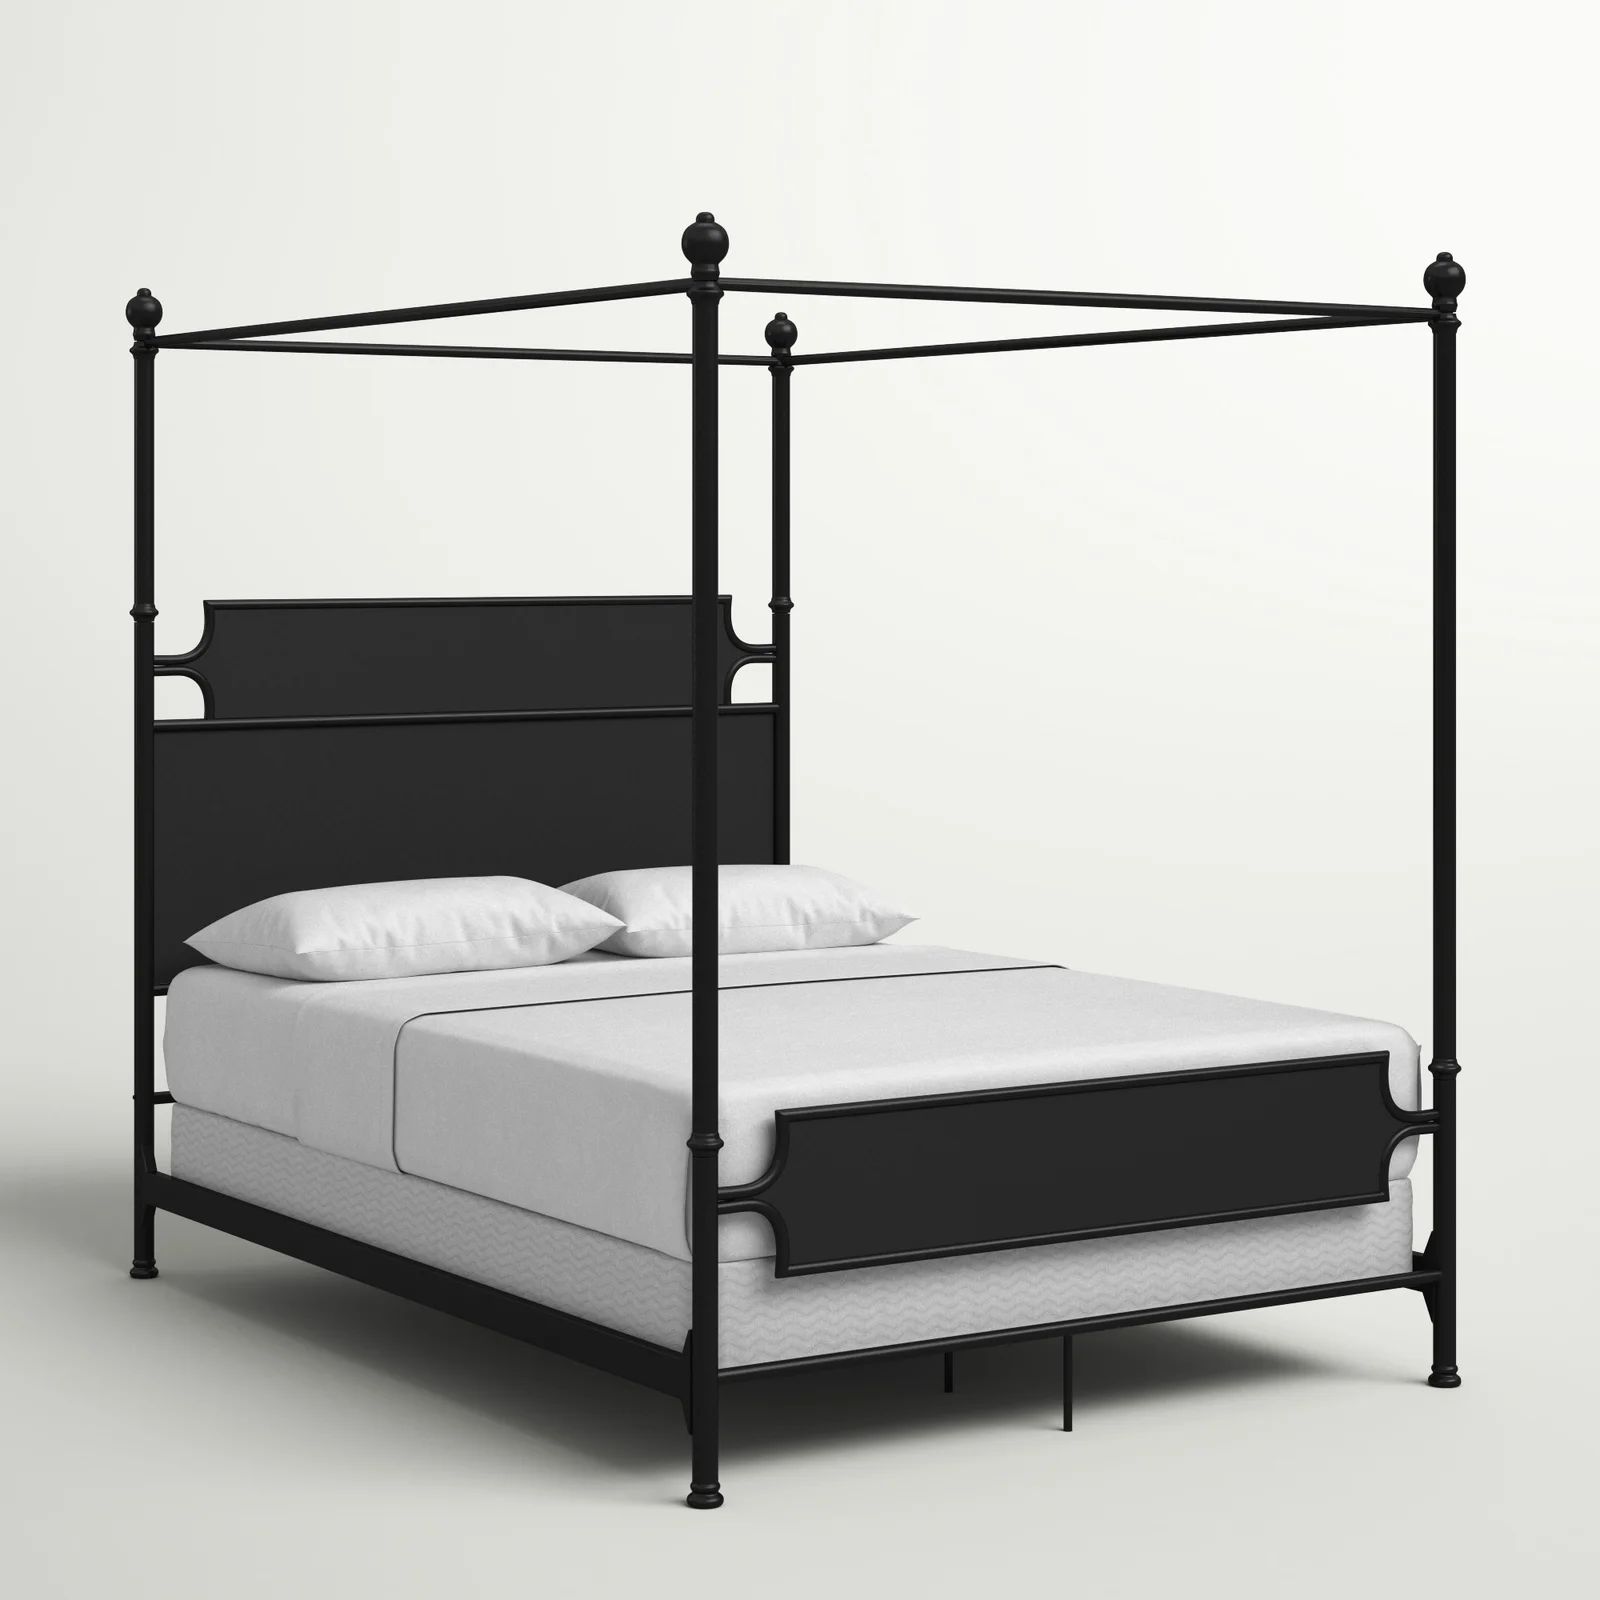 Clinchport Low Profile Canopy Bed | Wayfair North America